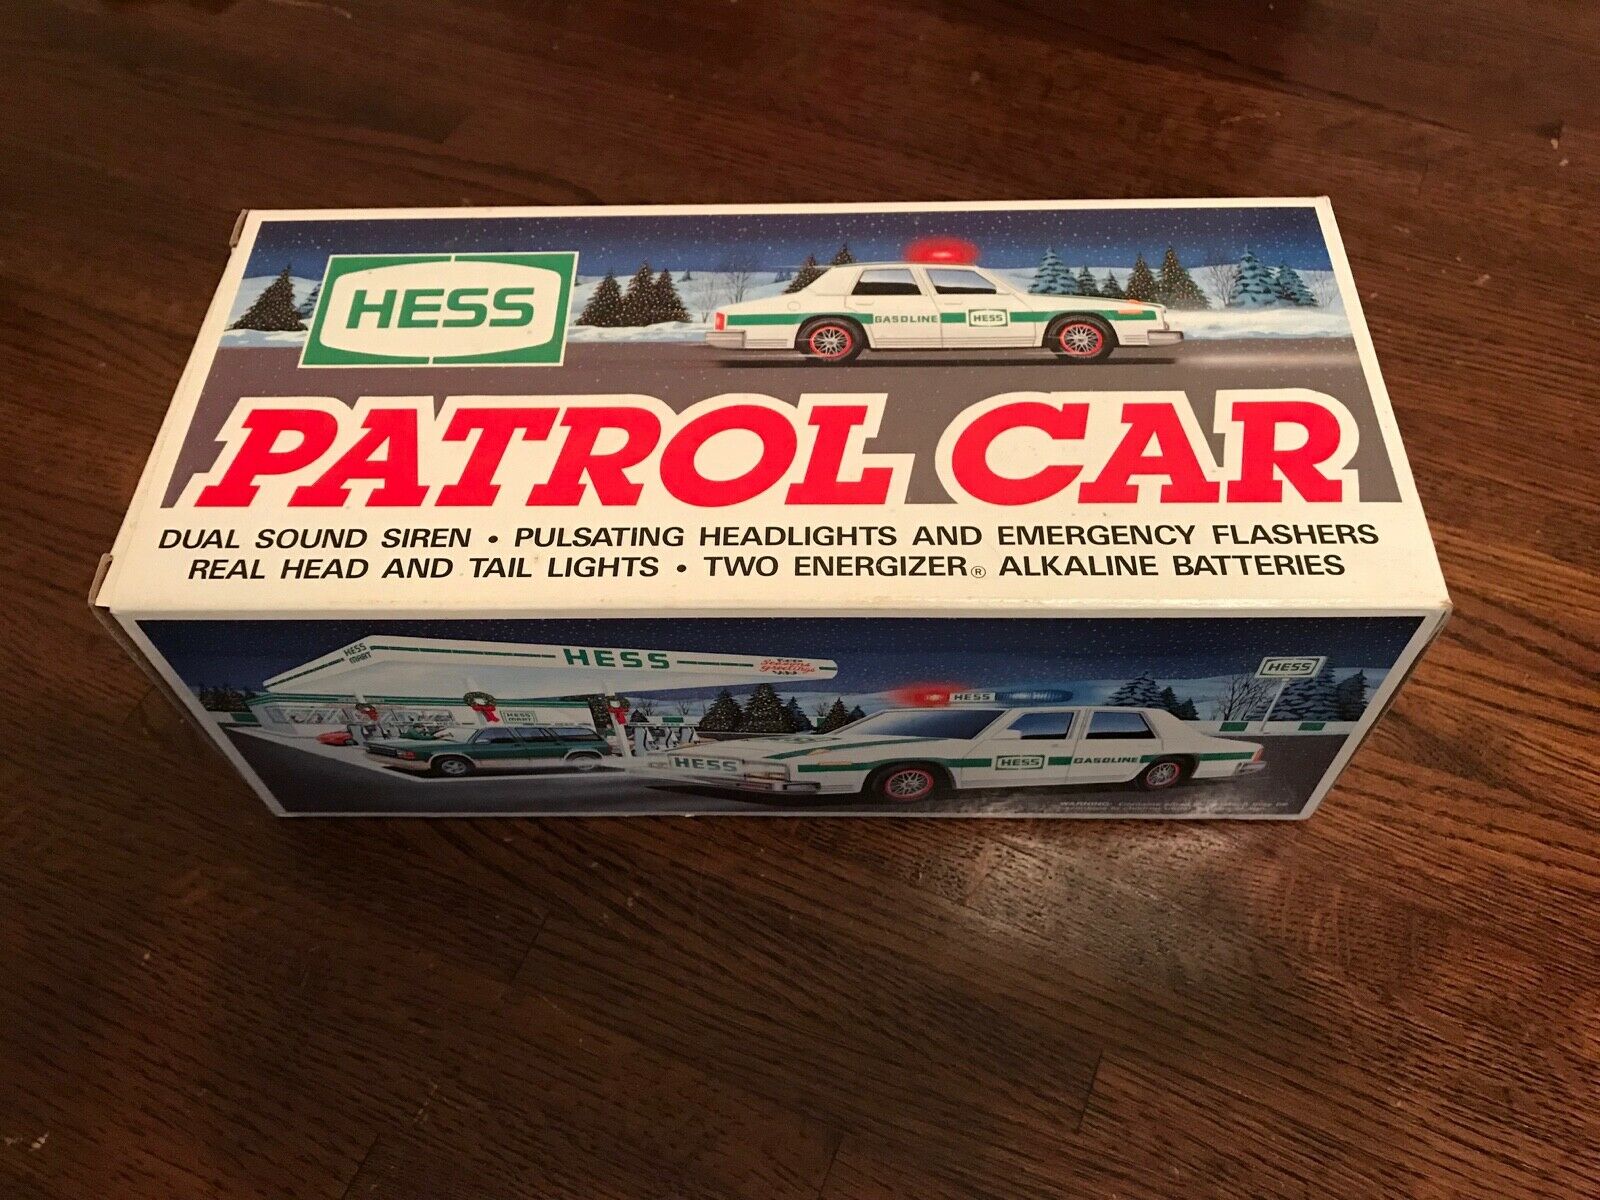 1993 Hess Toy Truck (patrol Police Car) - Brand New Condition - Original Owner